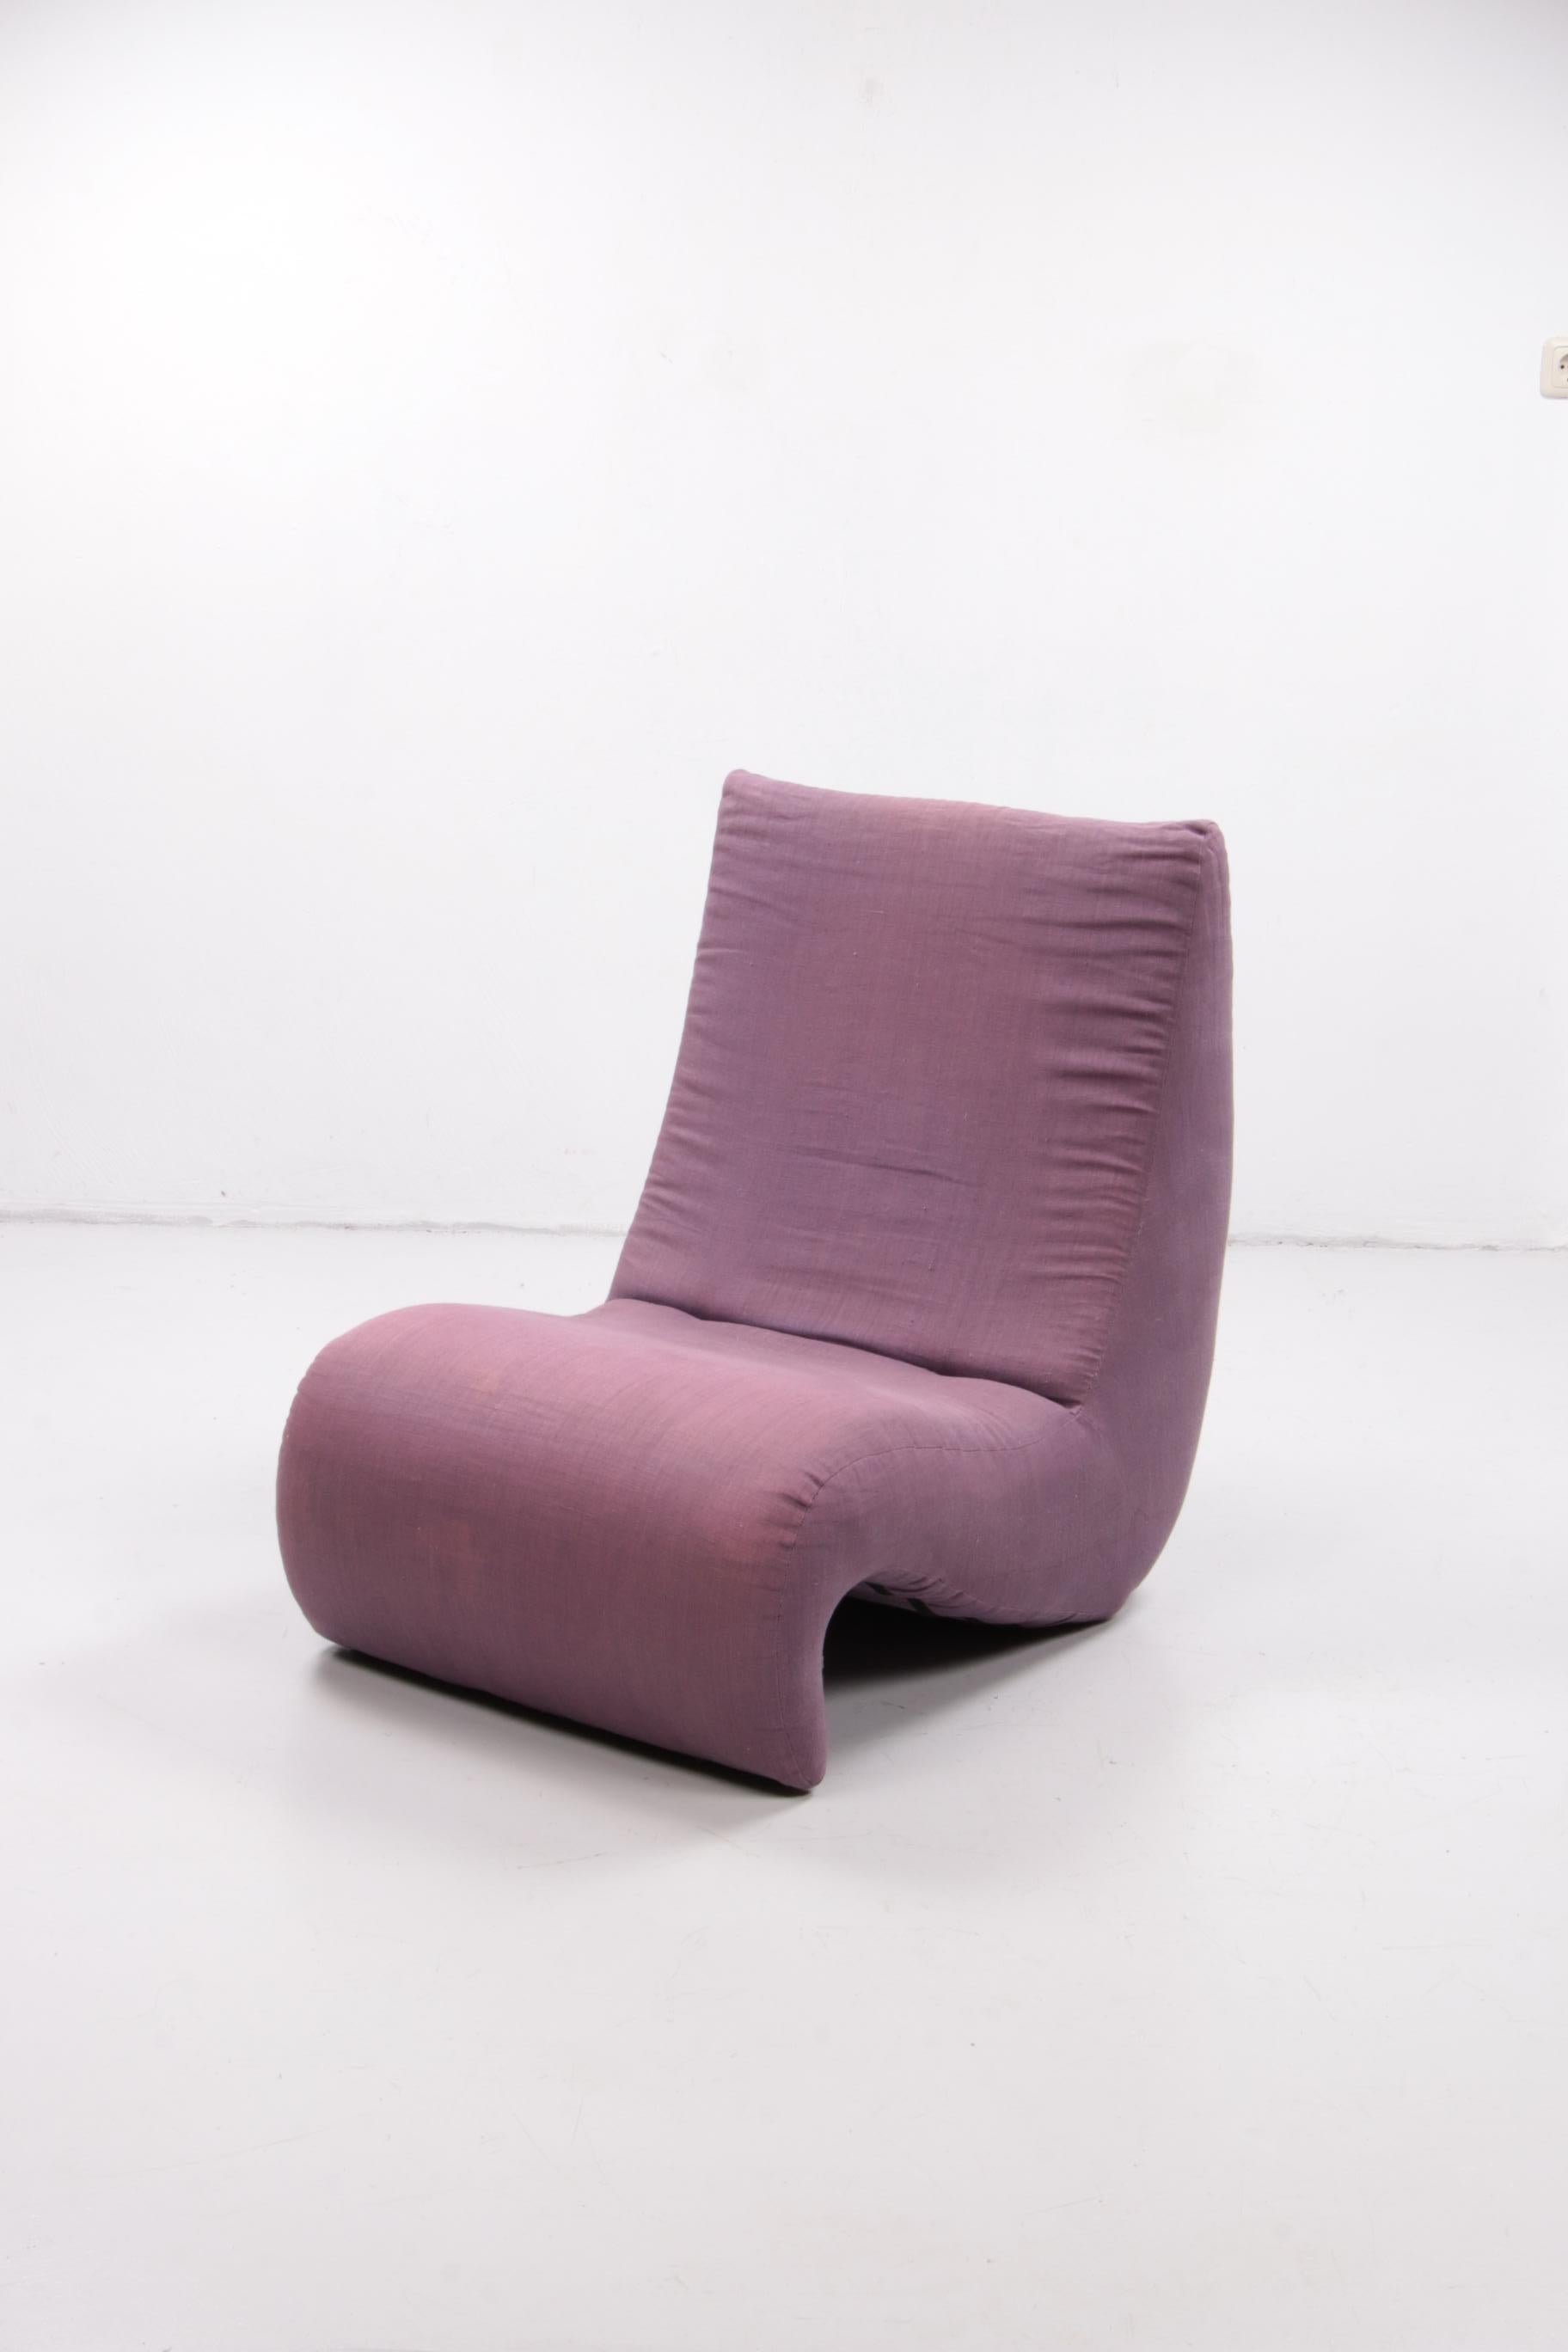 Beautiful design armchair from 1970, designed by Verner Panton for Vitra, known for the Panton chair.

The Amoebe was designed in 1970 by Verner Panton for his famous Visiona installation, which incorporates different versions of this